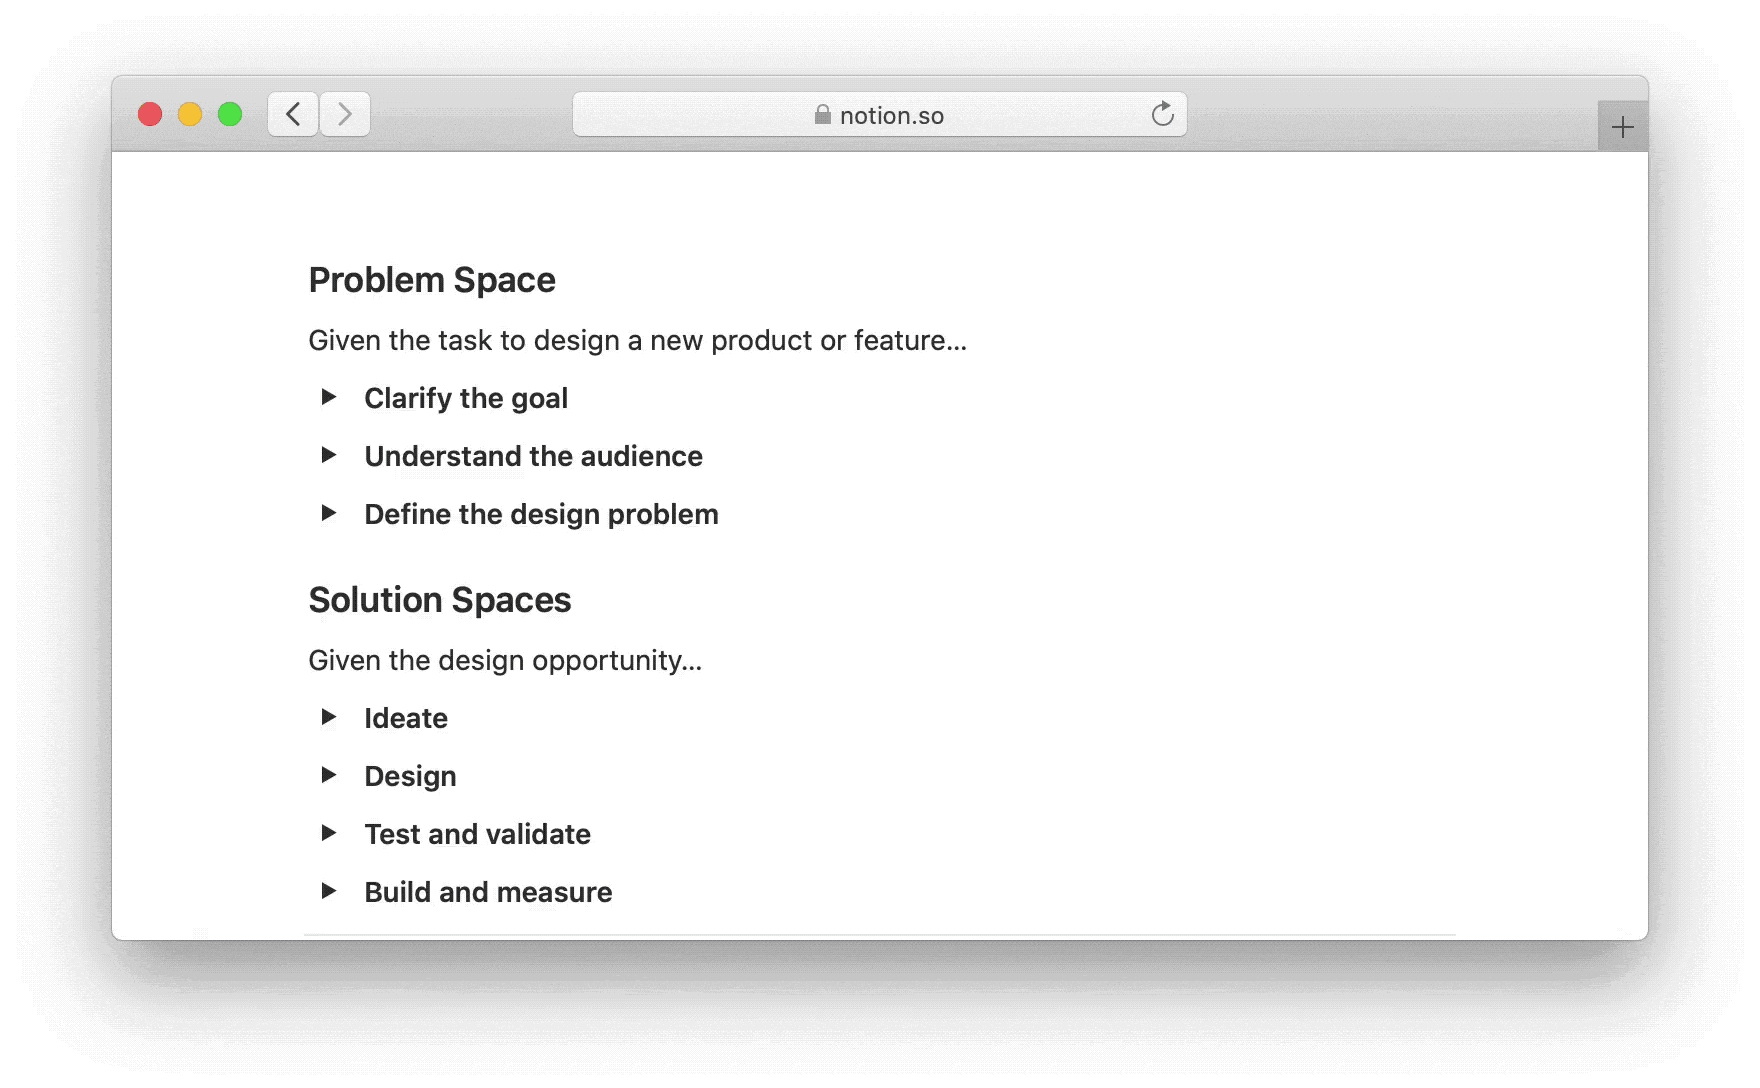 Animated GIF of list navigation using keyboard shortcuts inside the design process Notion page